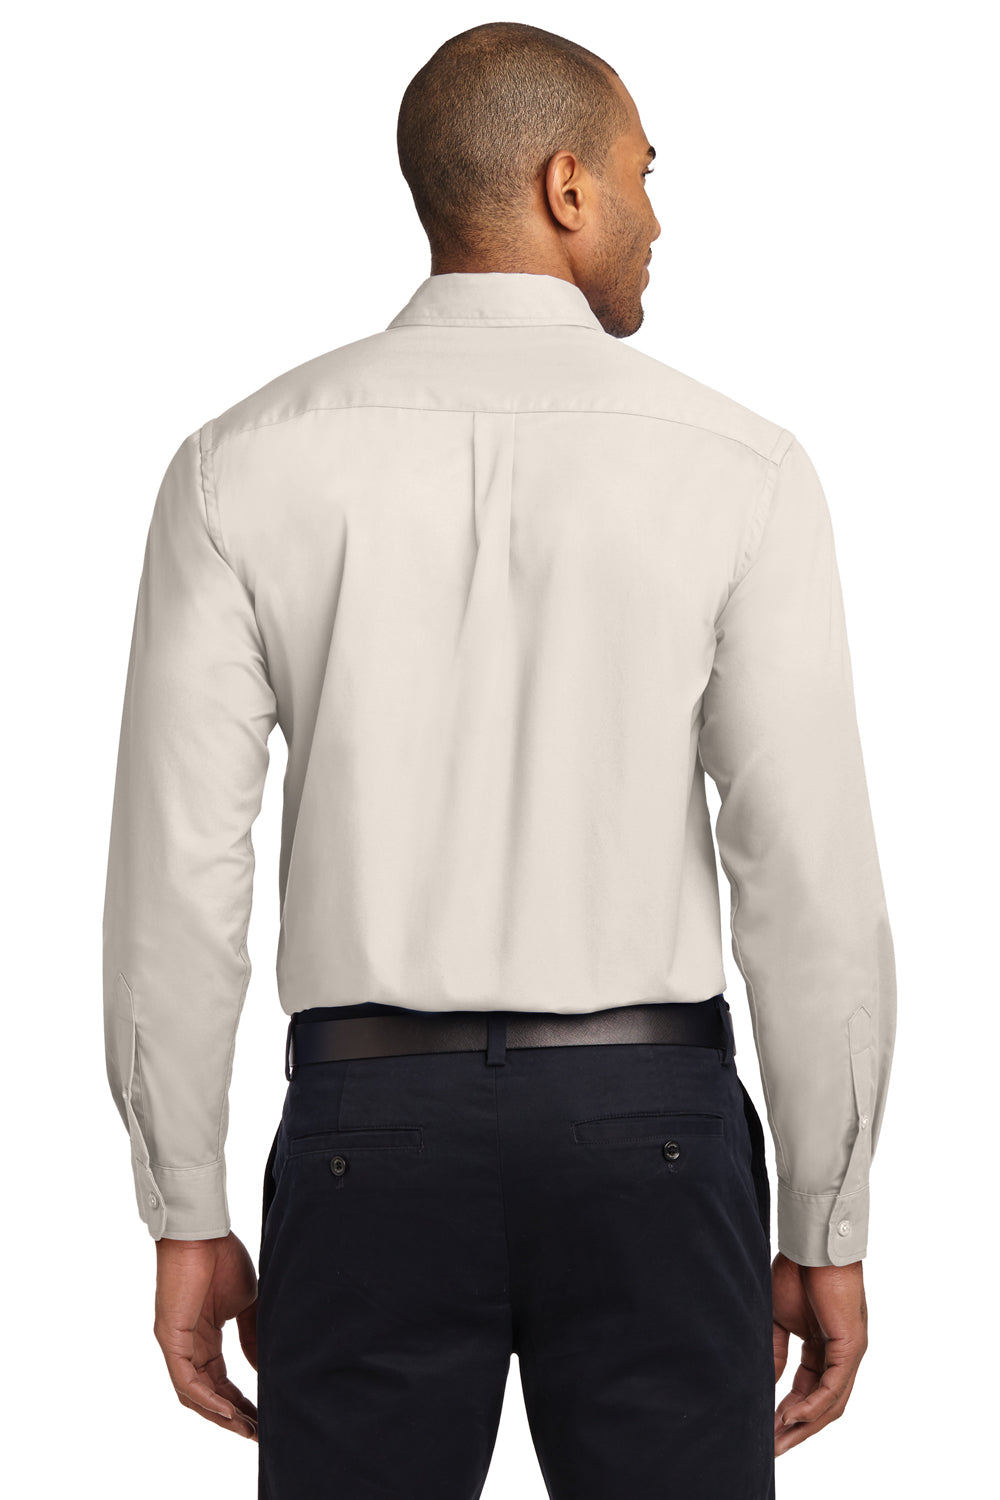 Port Authority S608/TLS608/S608ES Mens Easy Care Wrinkle Resistant Long Sleeve Button Down Shirt w/ Pocket Light Stone Back